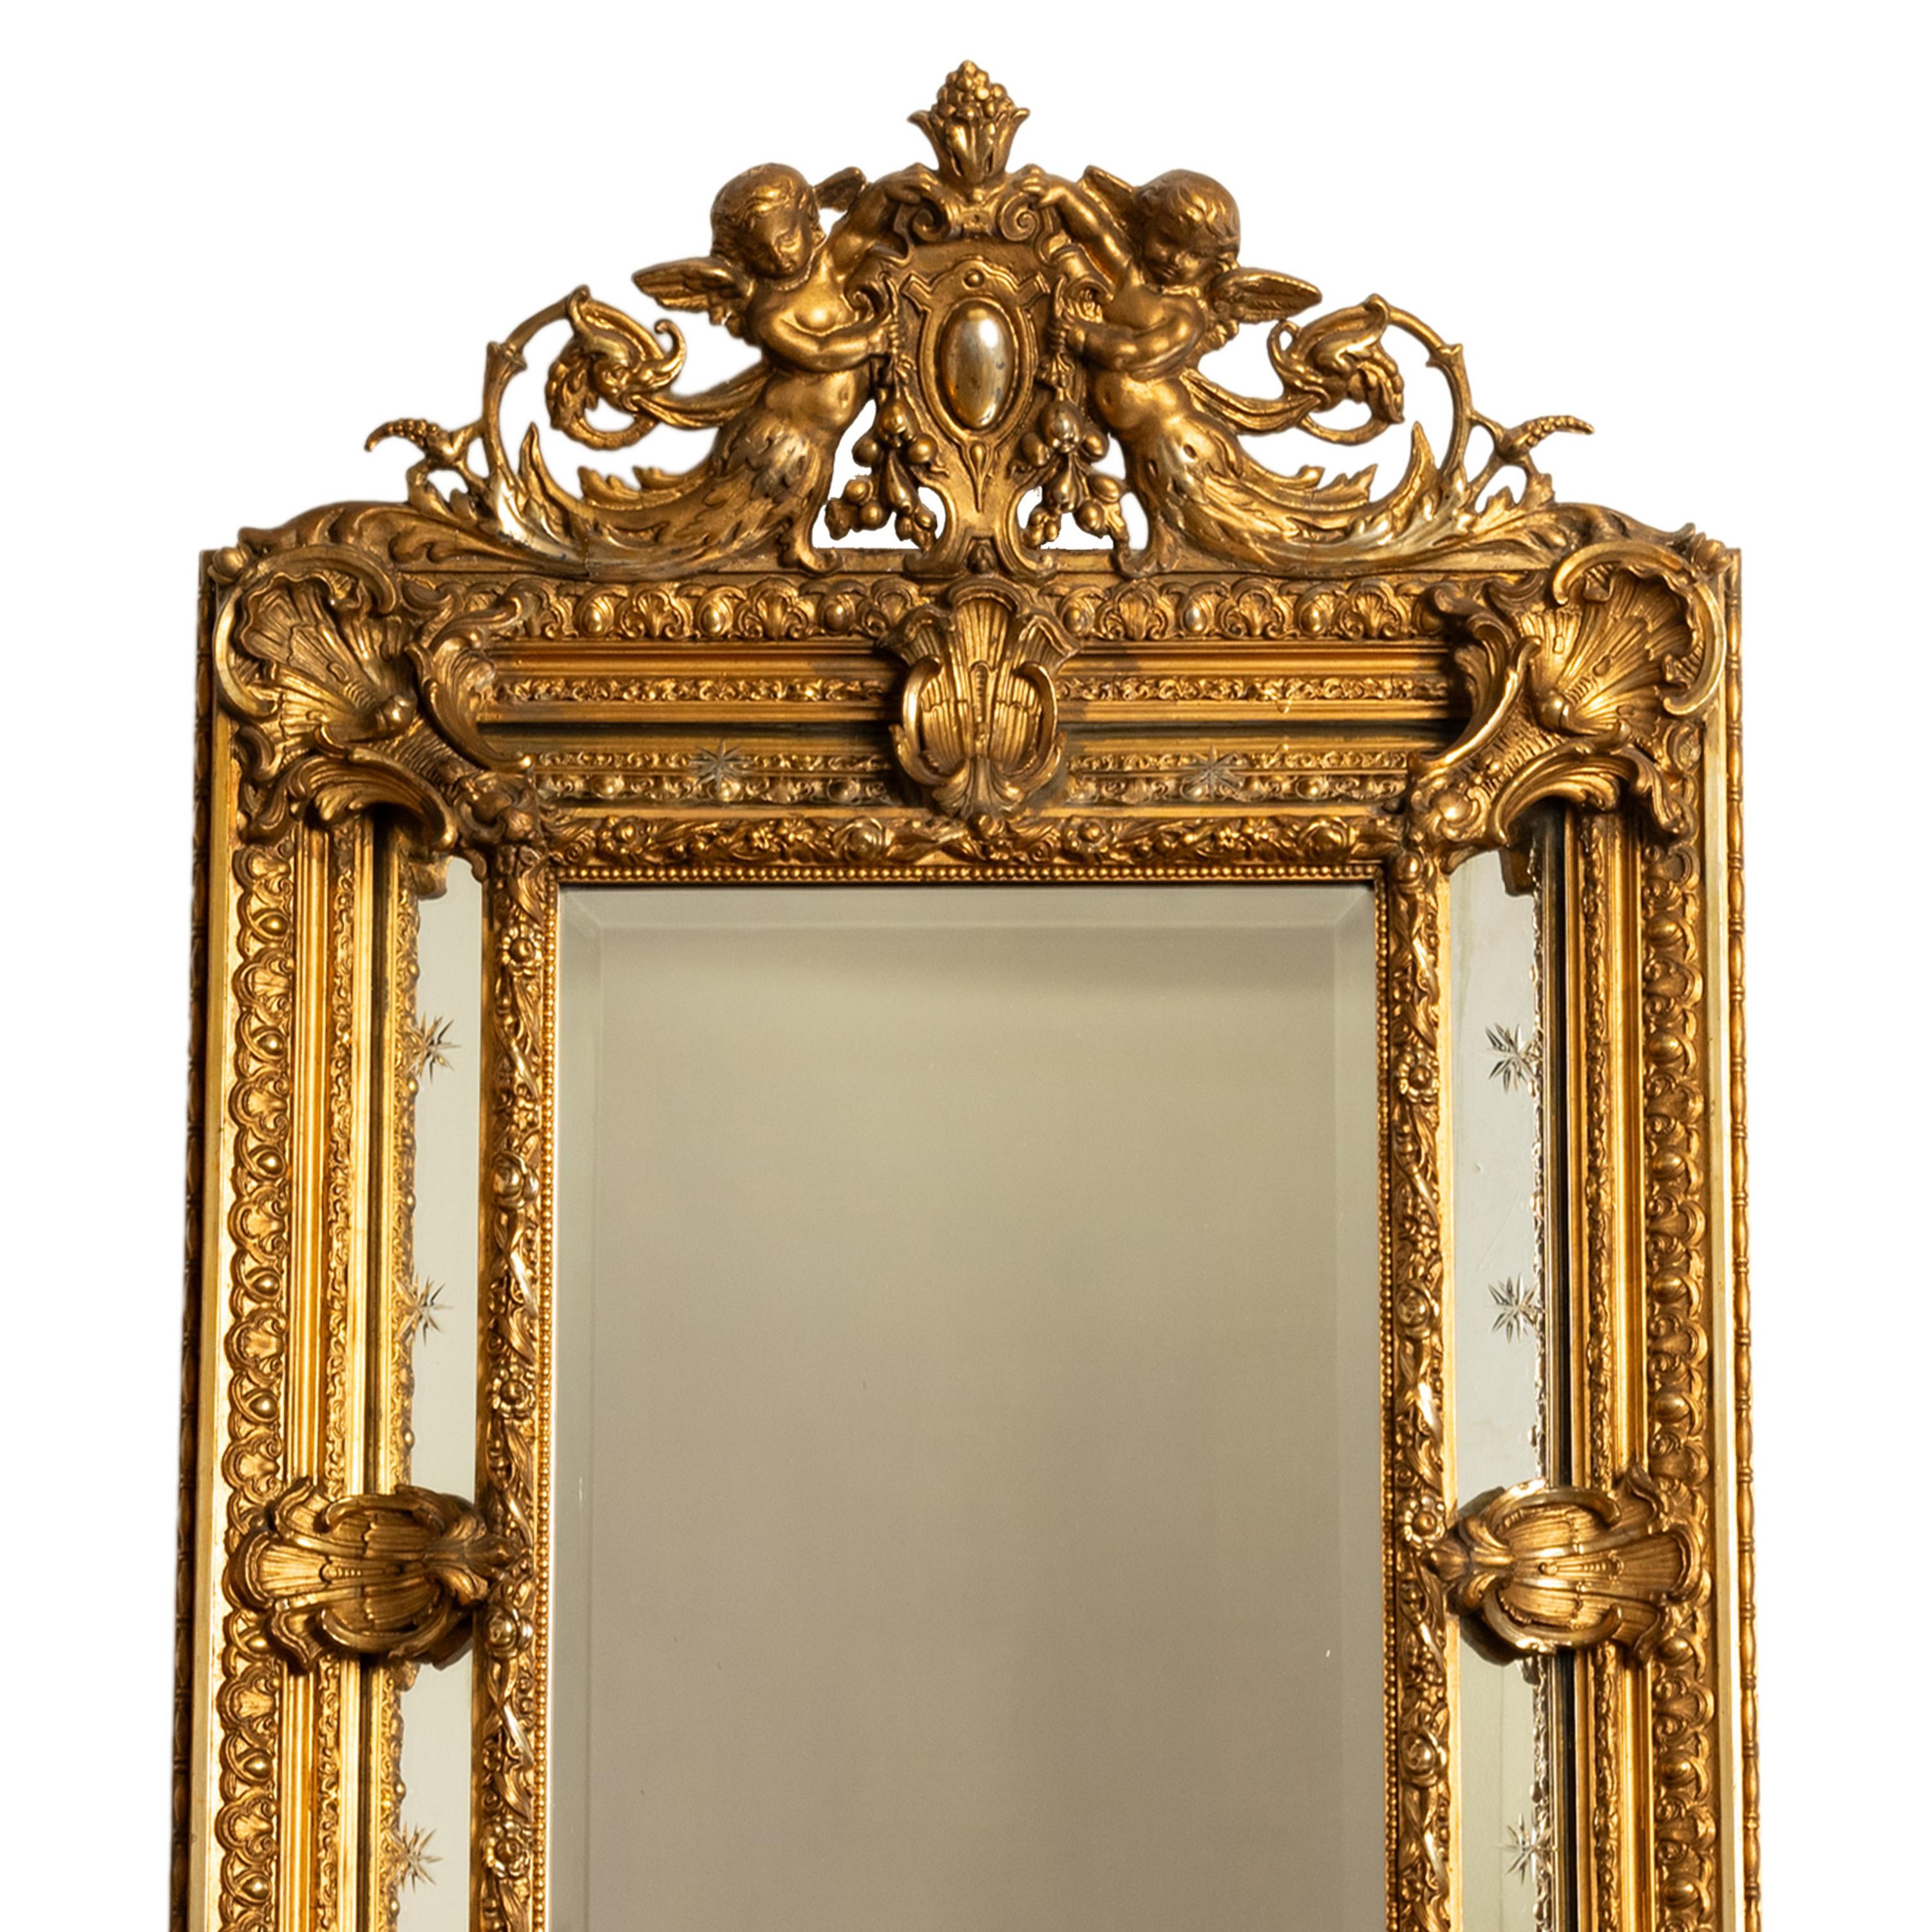 Rococo Revival Antique French Giltwood Neoclassical Rococo Mirror Etched Stars Cherubs 1870  For Sale